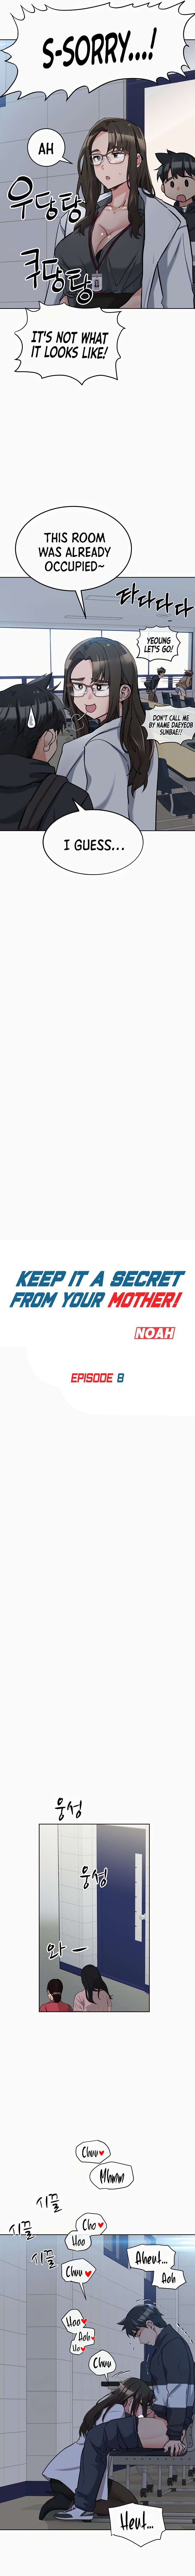 Keep it a secret from your mother! - Chapter 8 Page 3